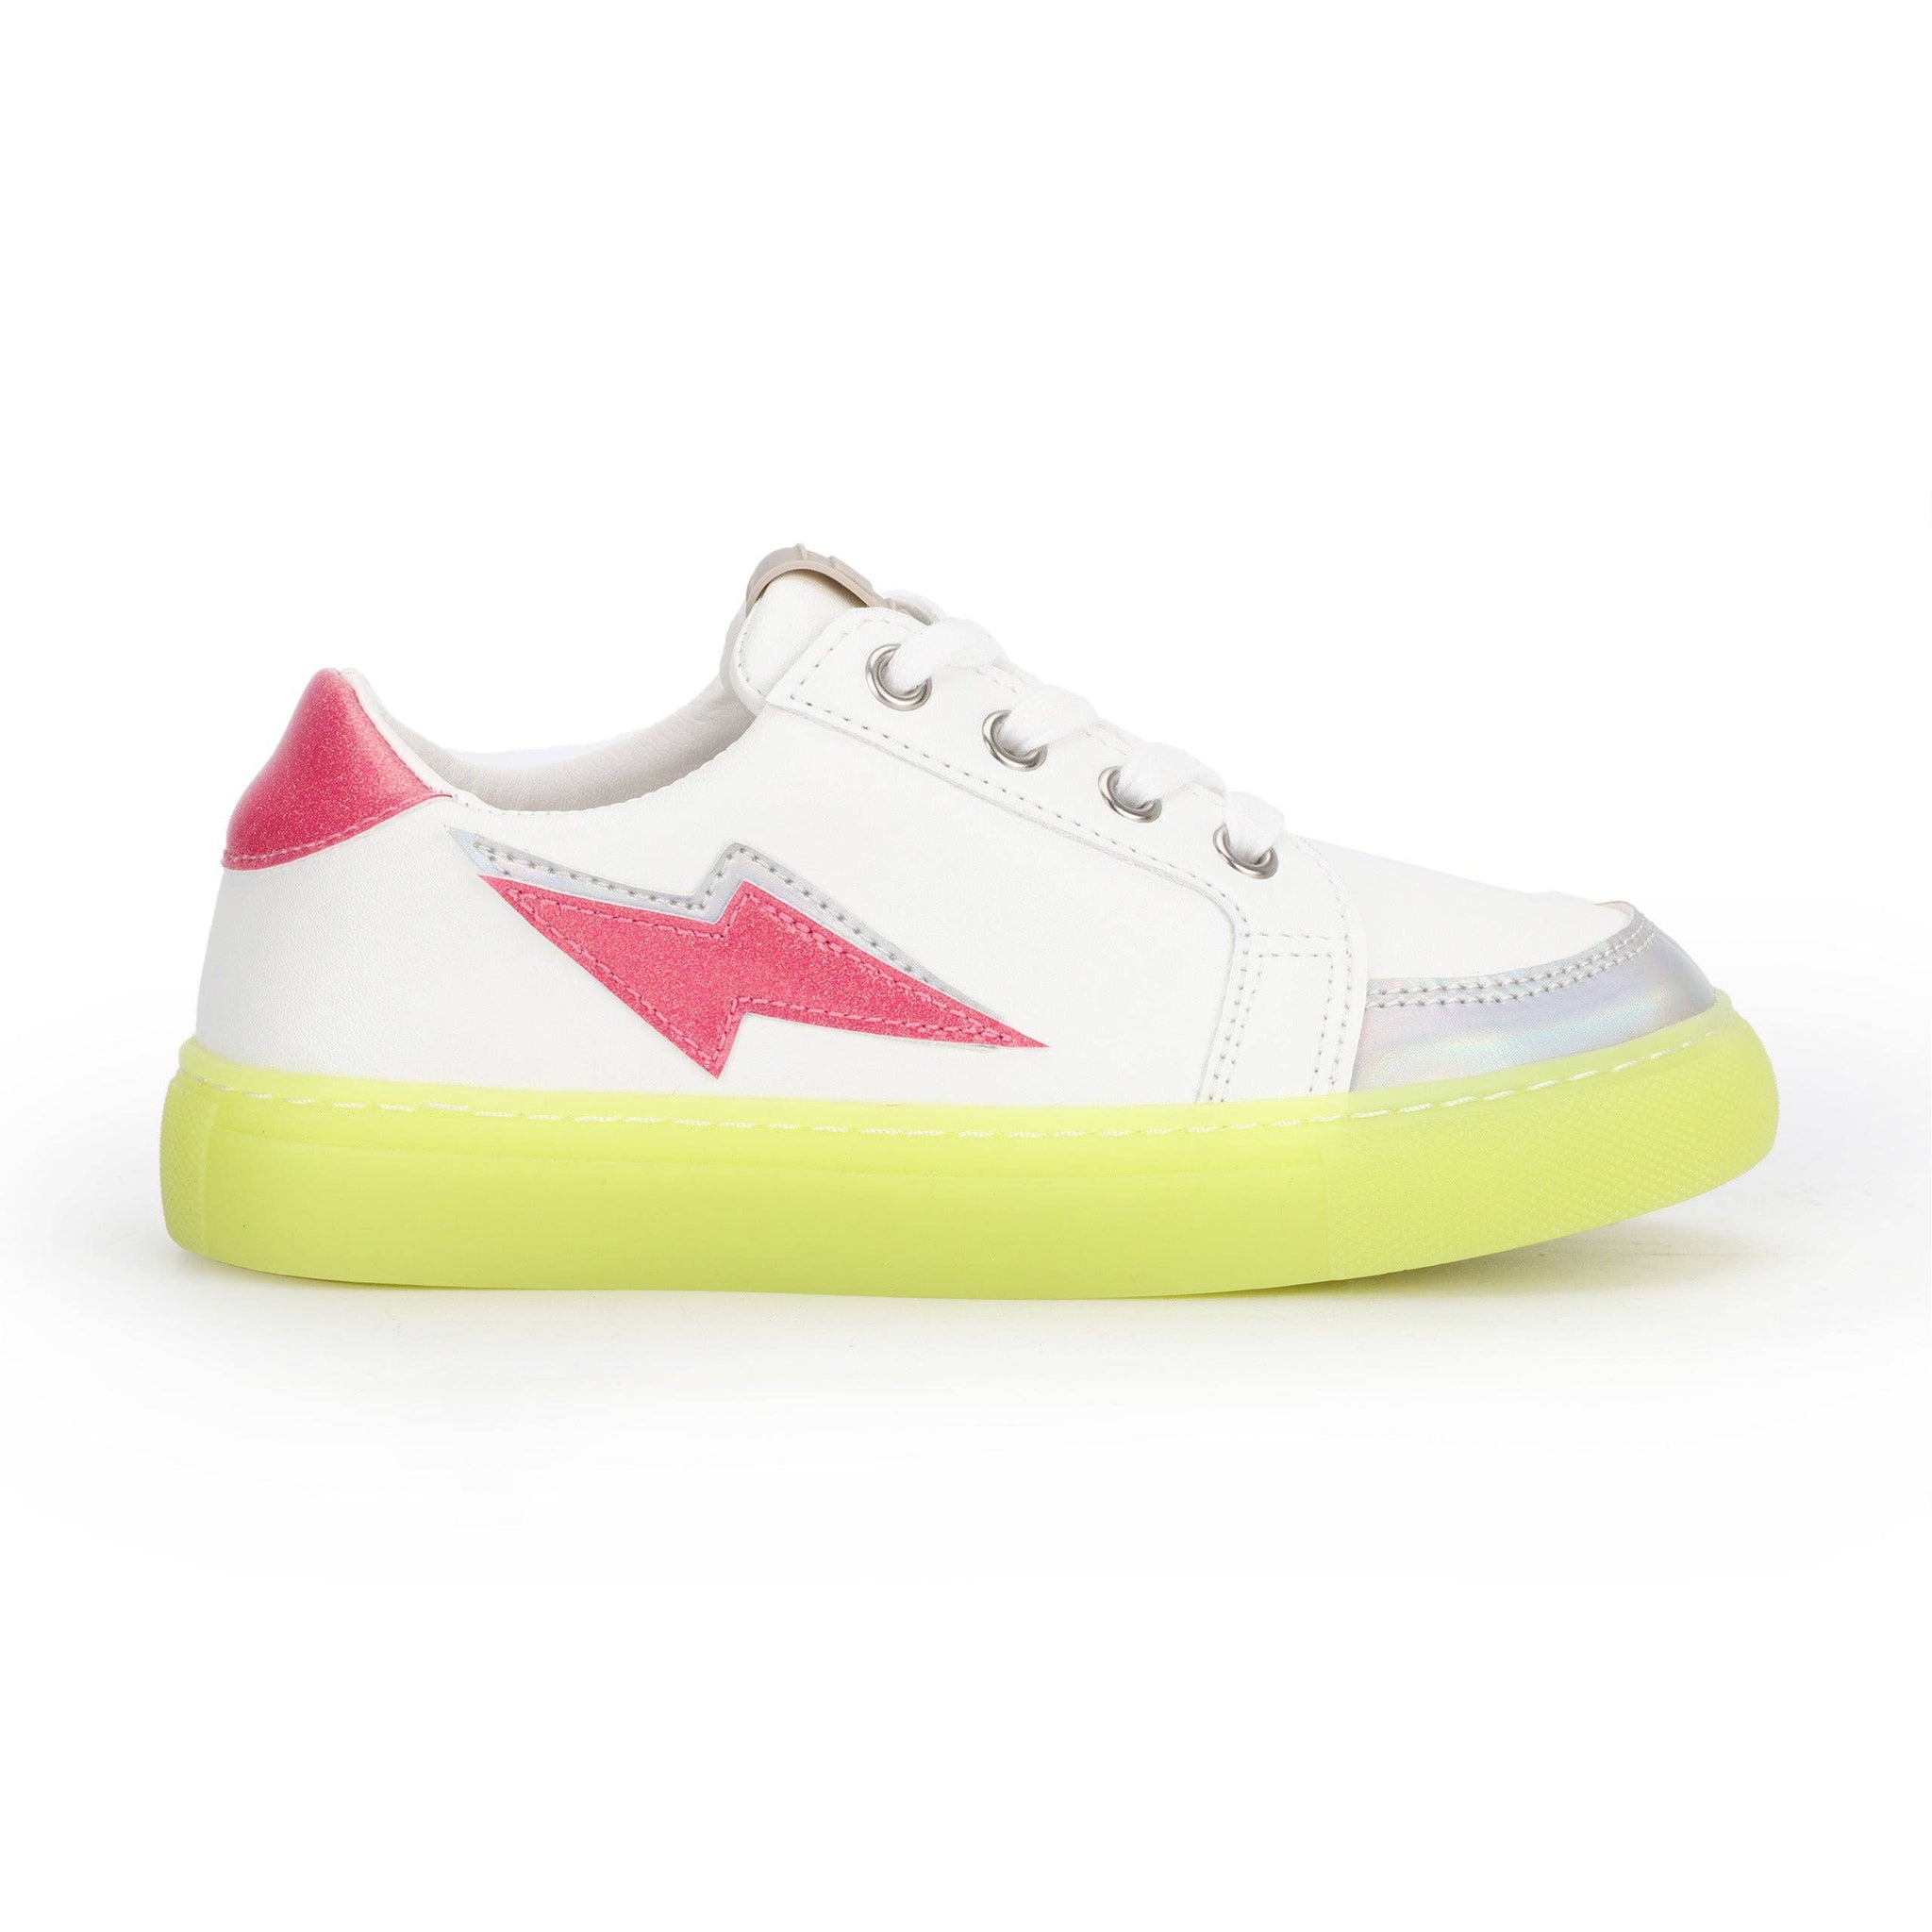 Miss Bolt Sneaker in Hot Pink/Neon Yellow